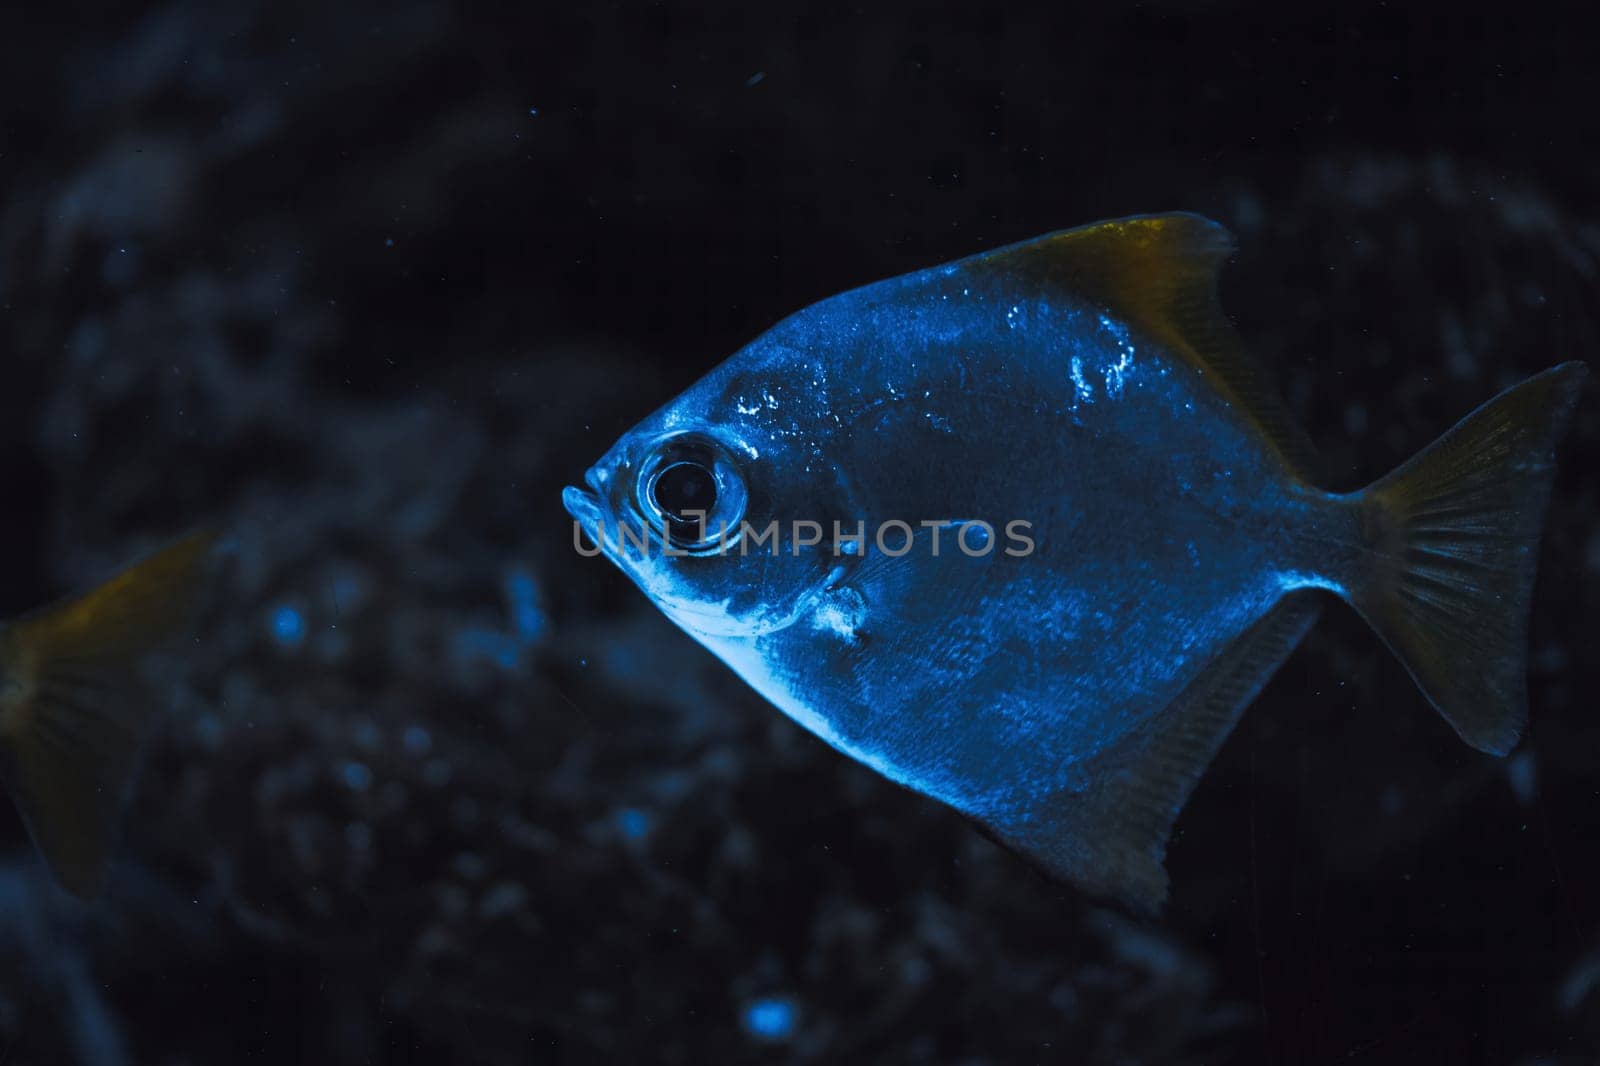 Wild fish swimming underwater in natural environment in blue water background. download image